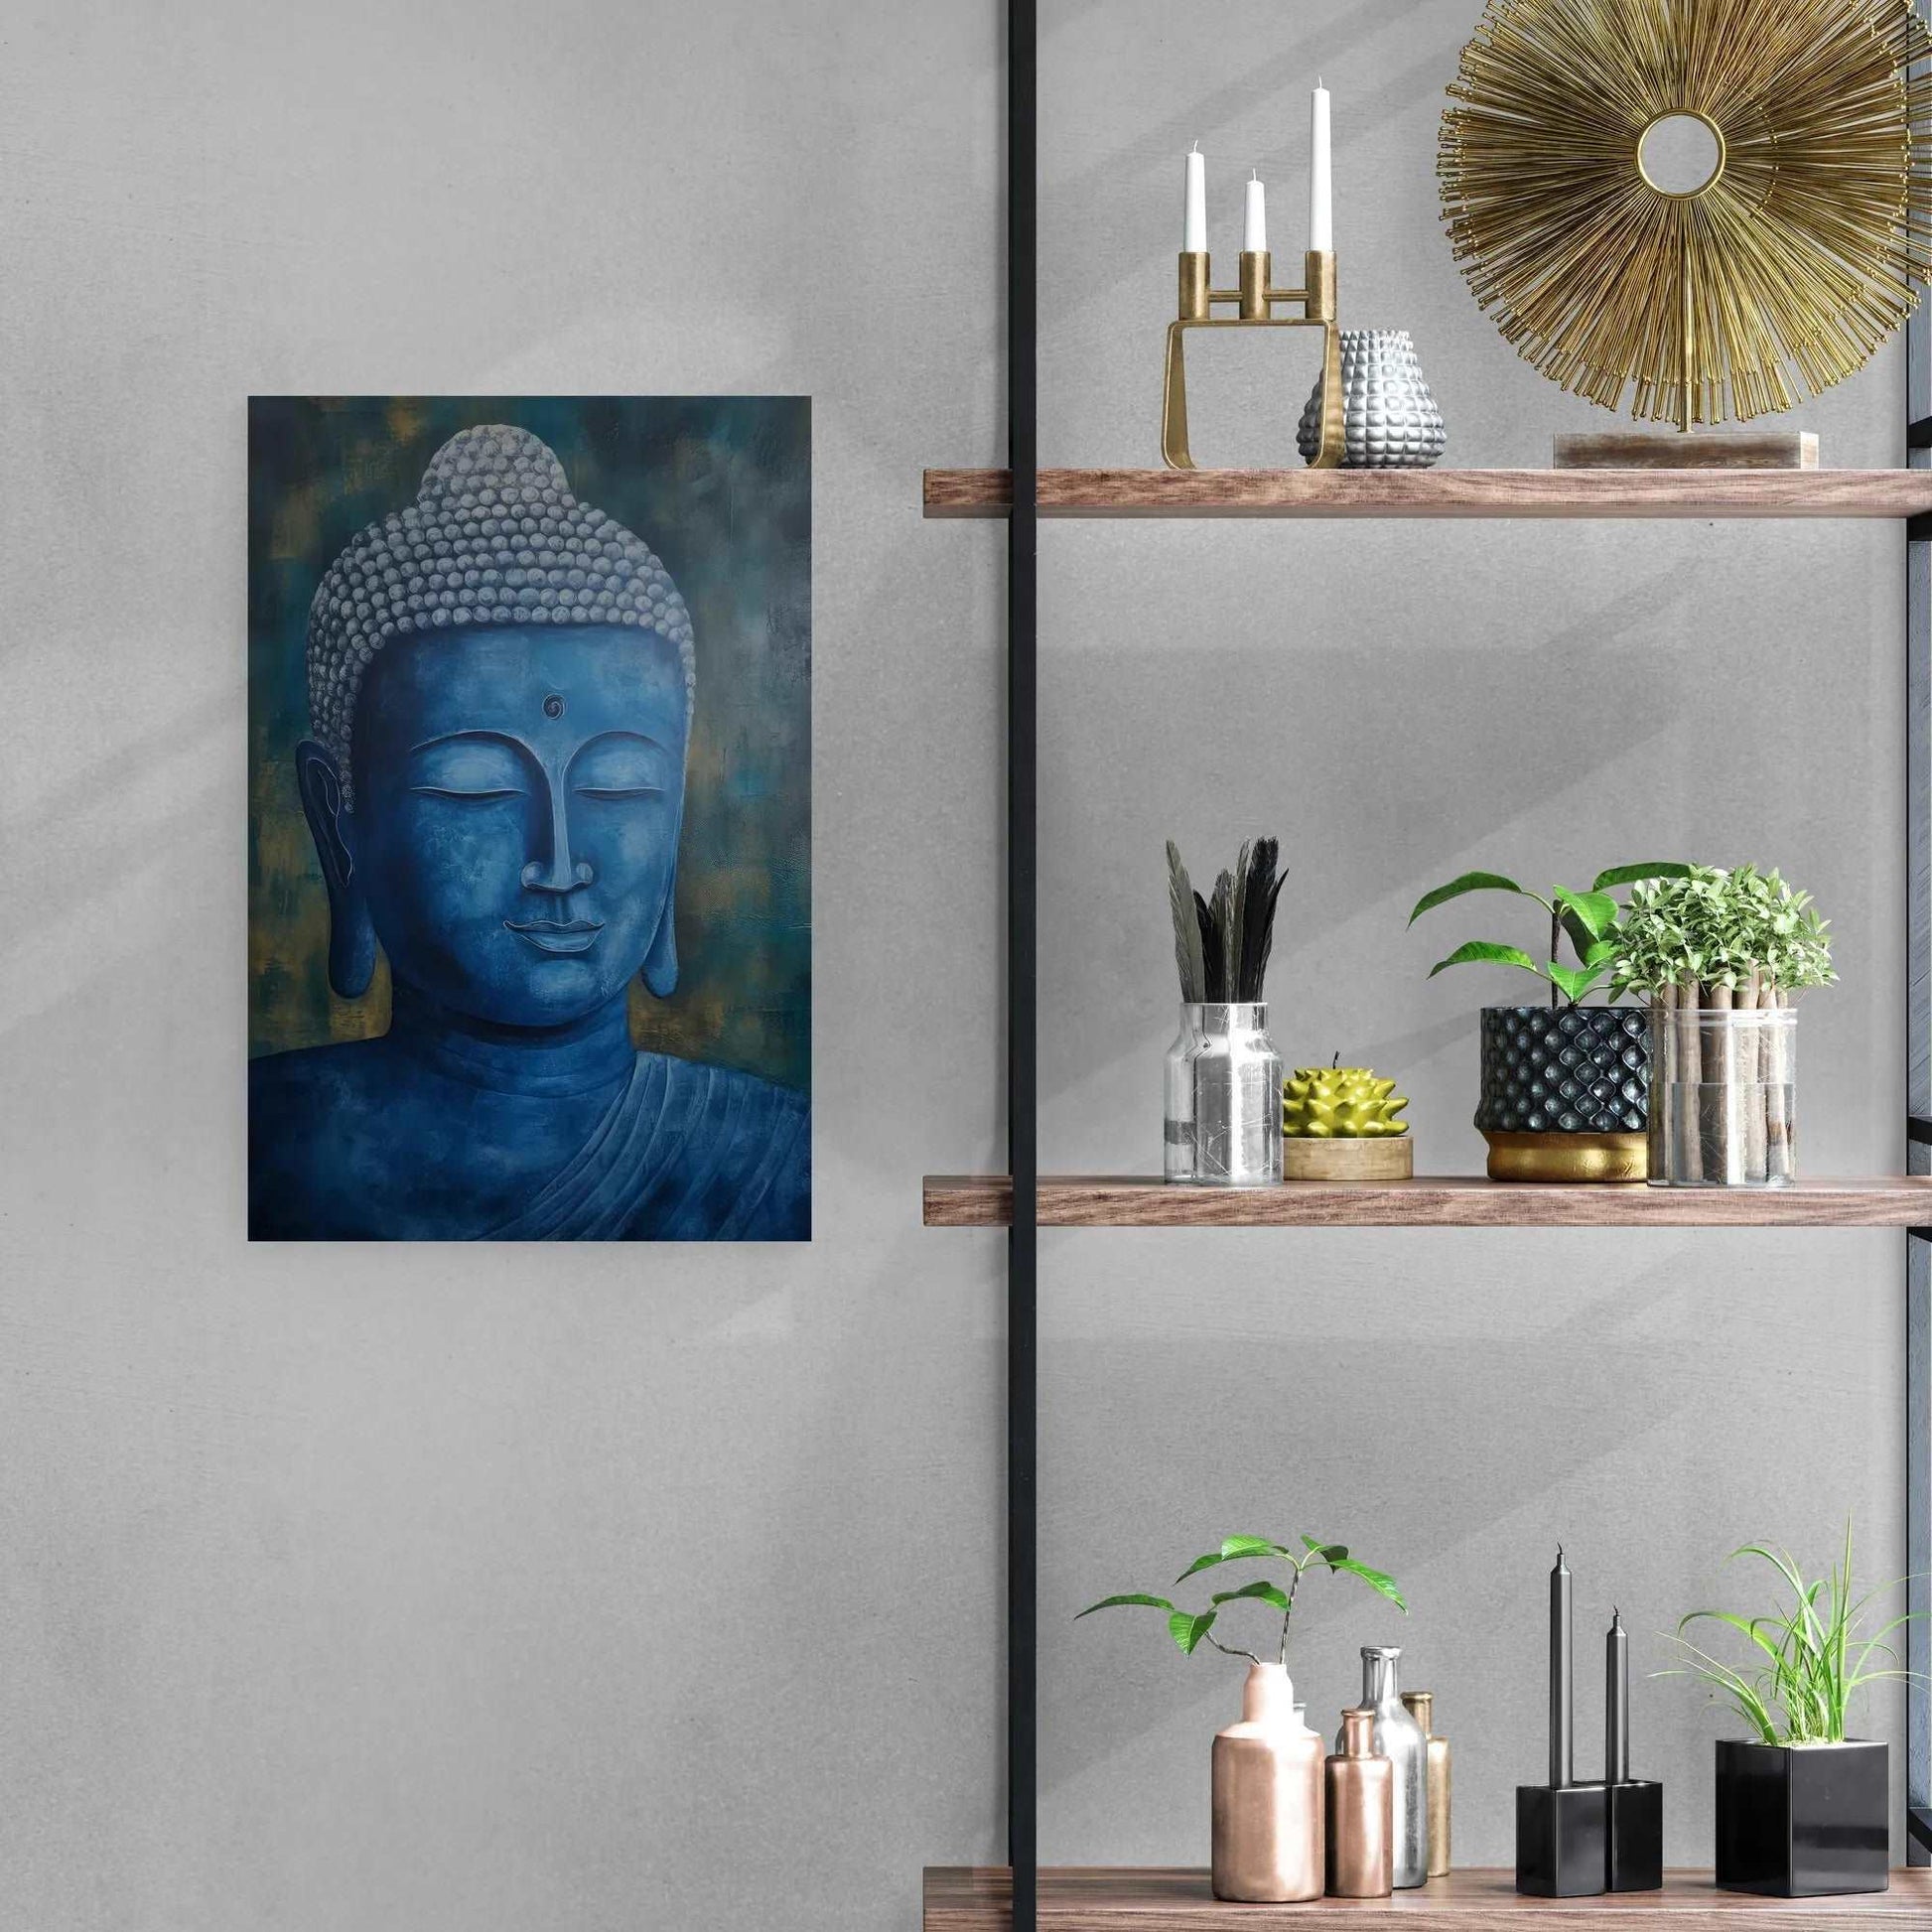 "Contemporary home decor featuring a blue and gold Buddha painting, with floating wooden shelves holding an assortment of decorative items.